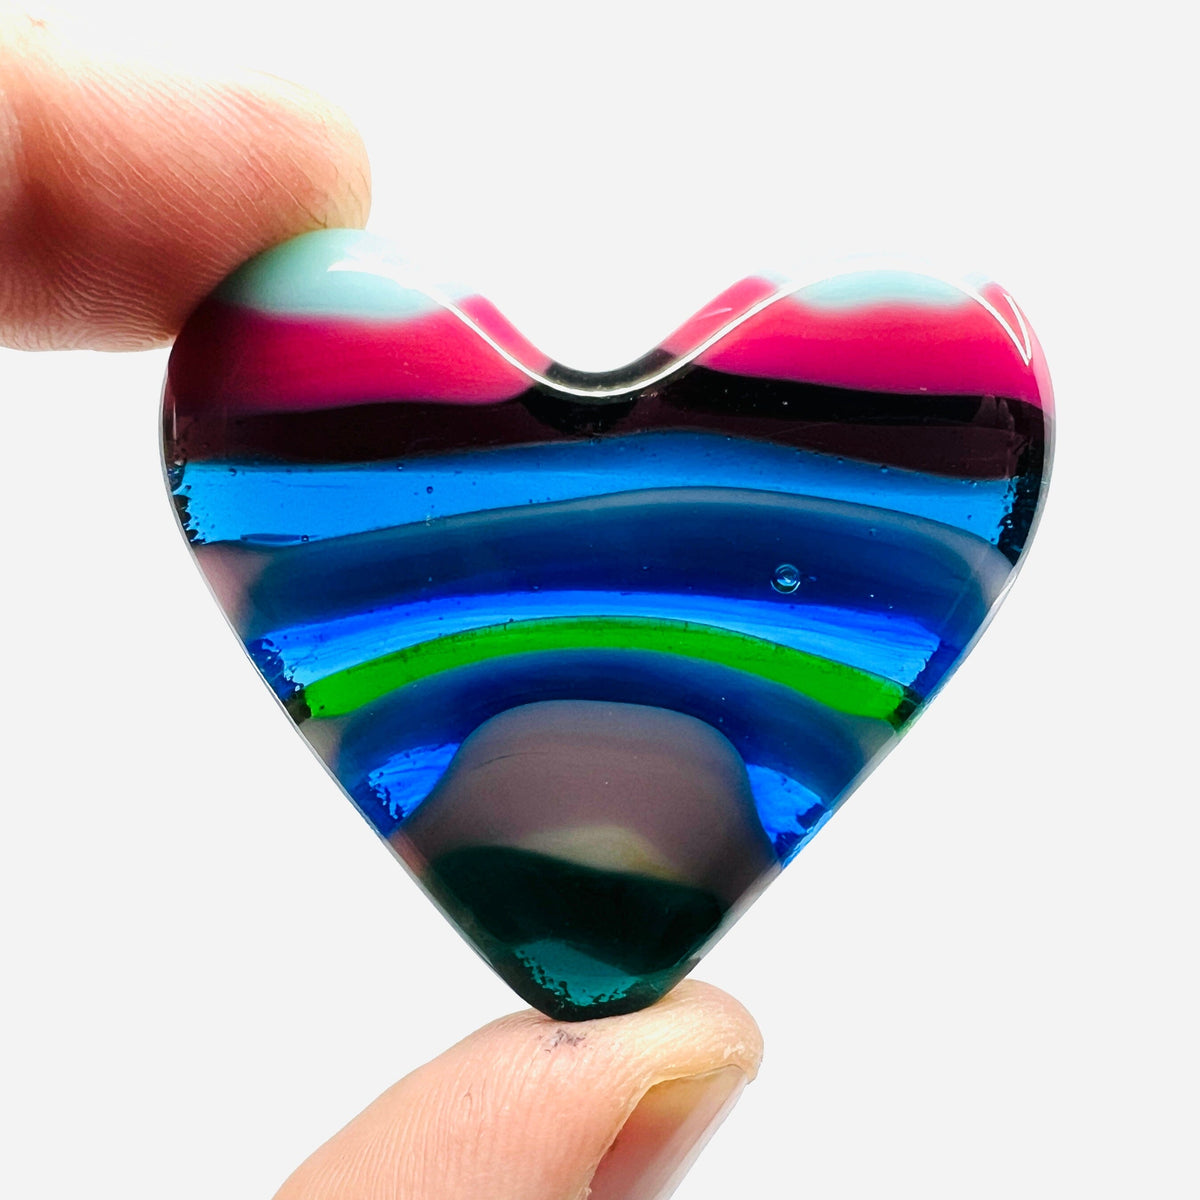 Fused Pocket Heart 290 Miniature Glimmer Glass Gifts 